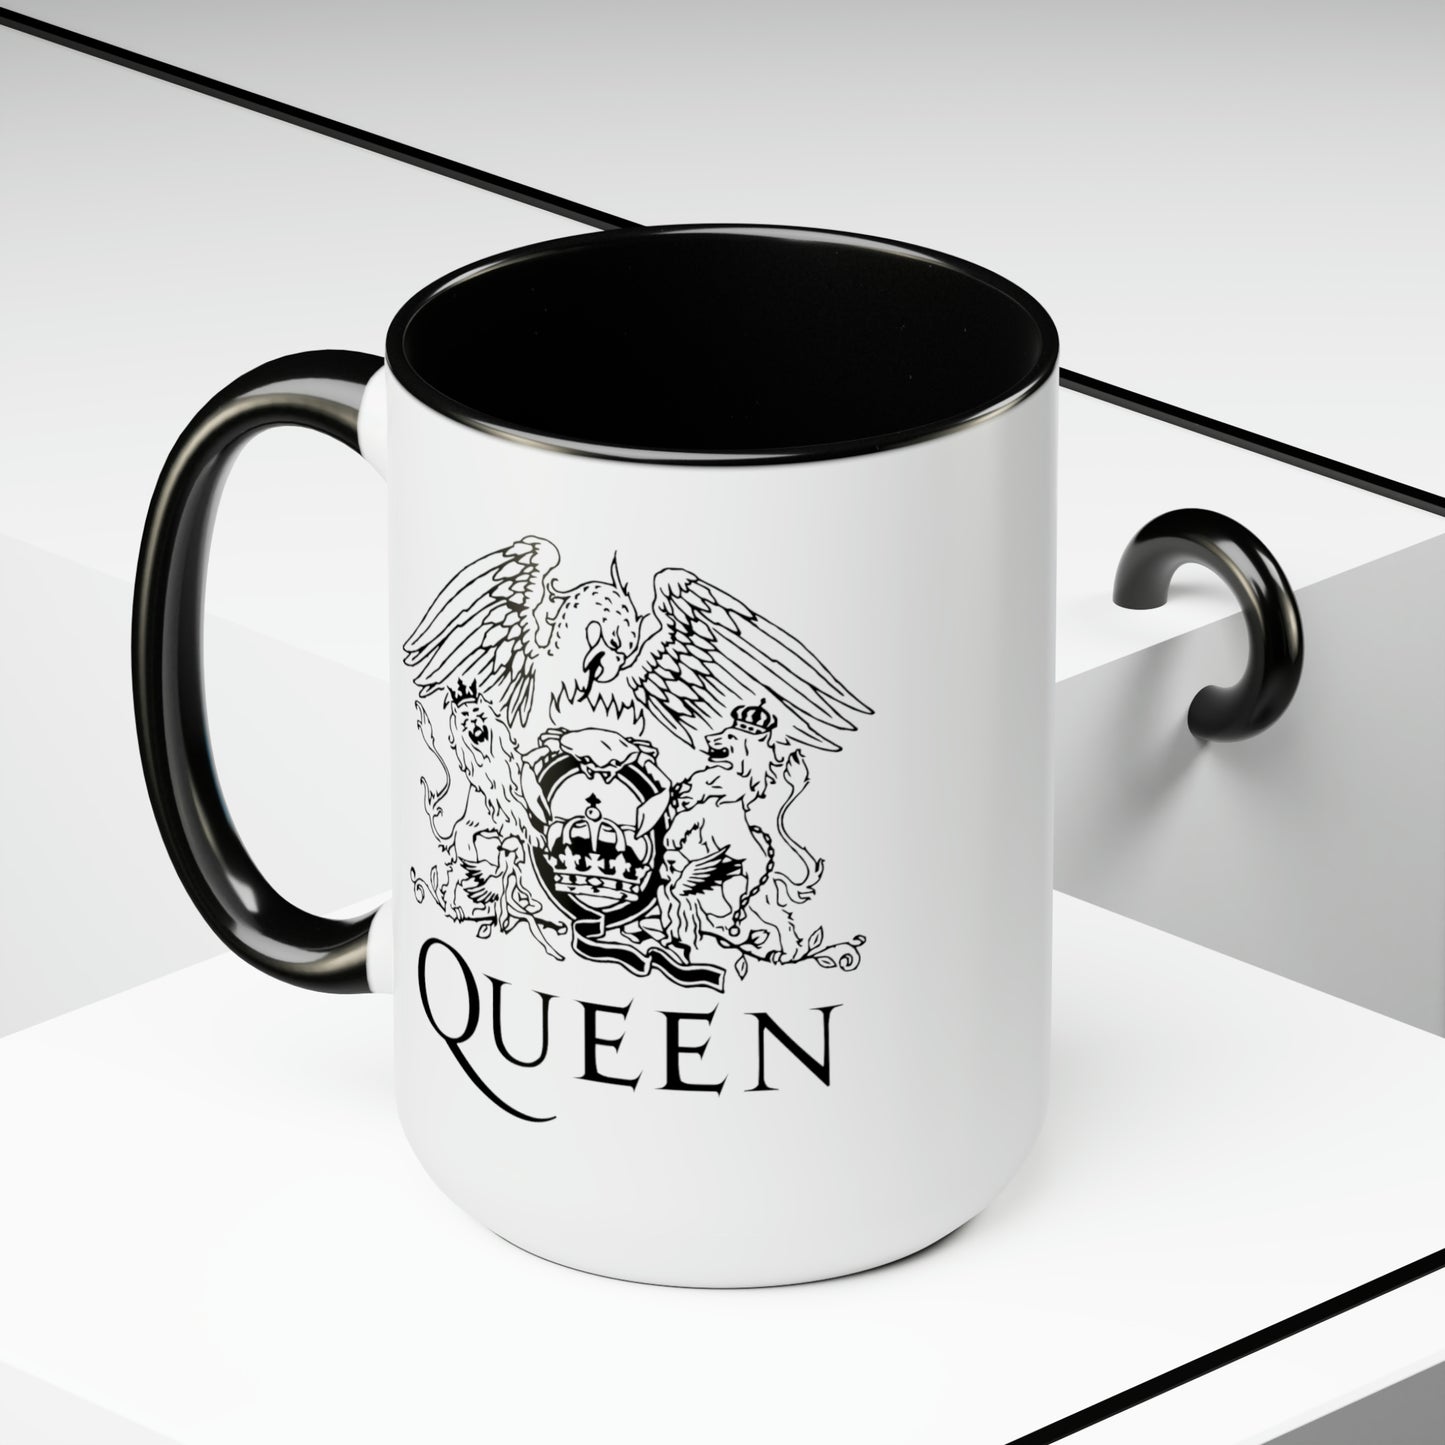 Queen Coffee Mugs - Double Sided Black Accent White Ceramic 15oz by TheGlassyLass